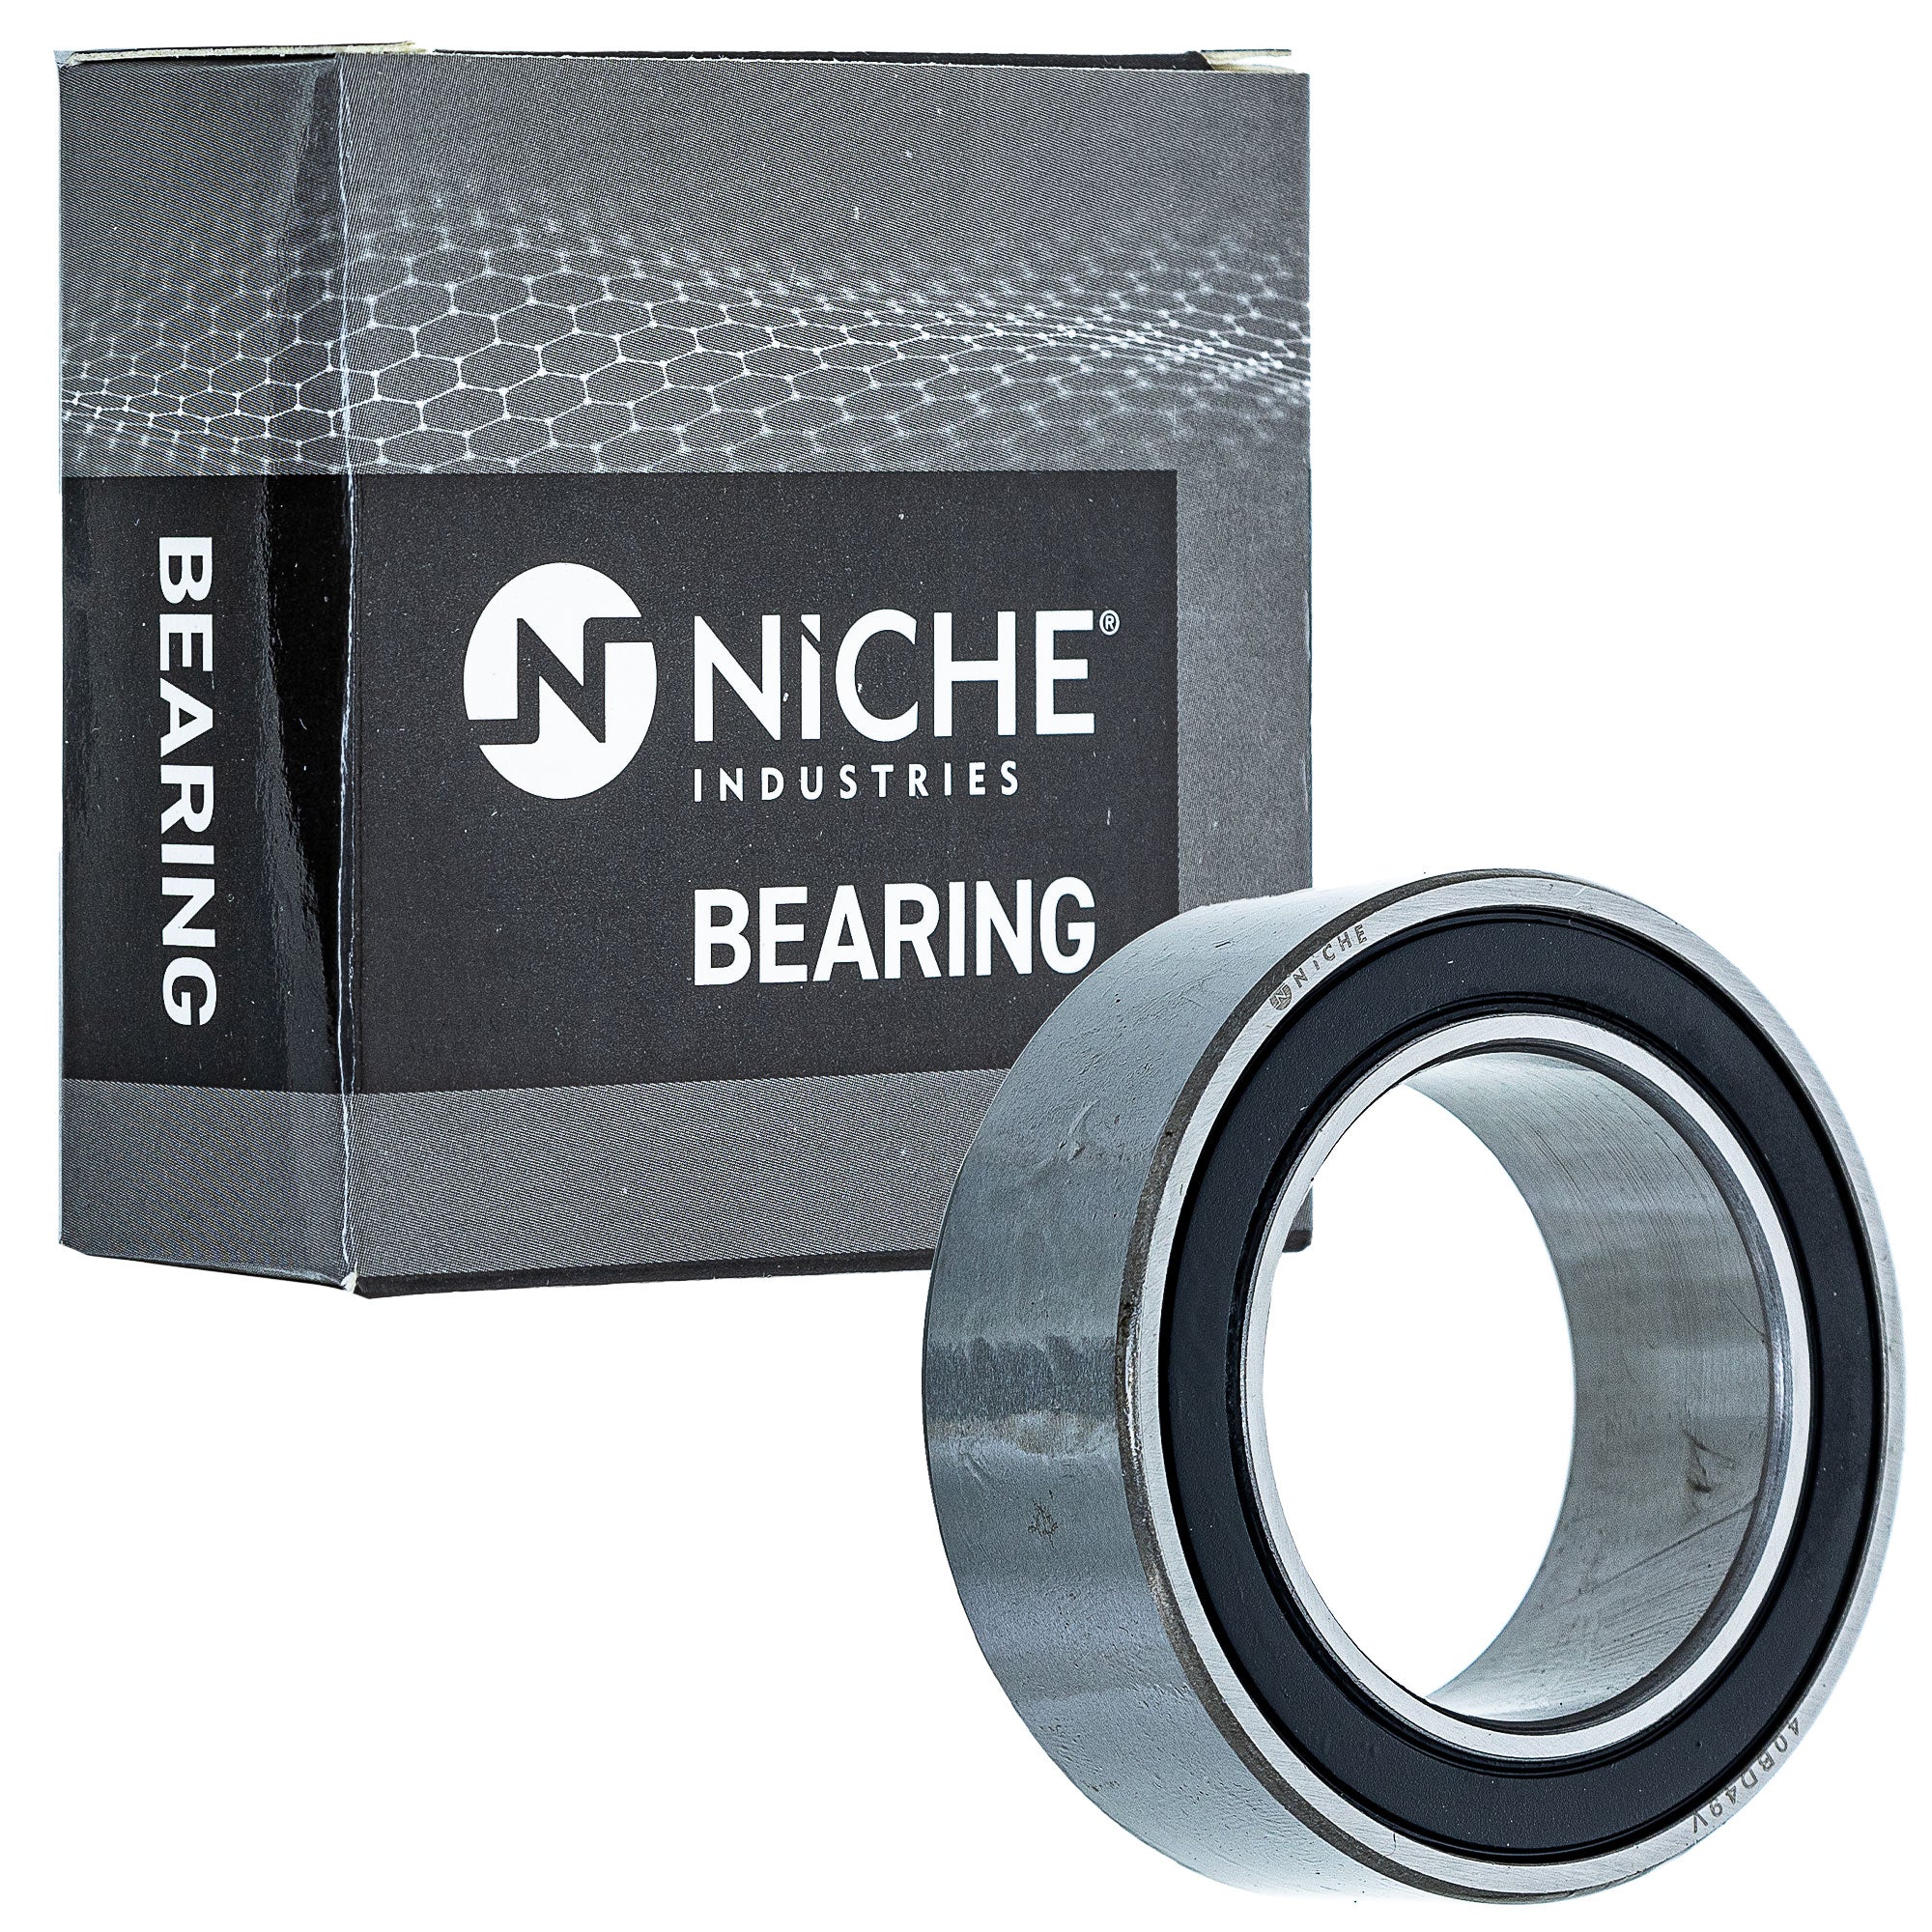 NICHE 519-CBB2202R Bearing for zOTHER DS